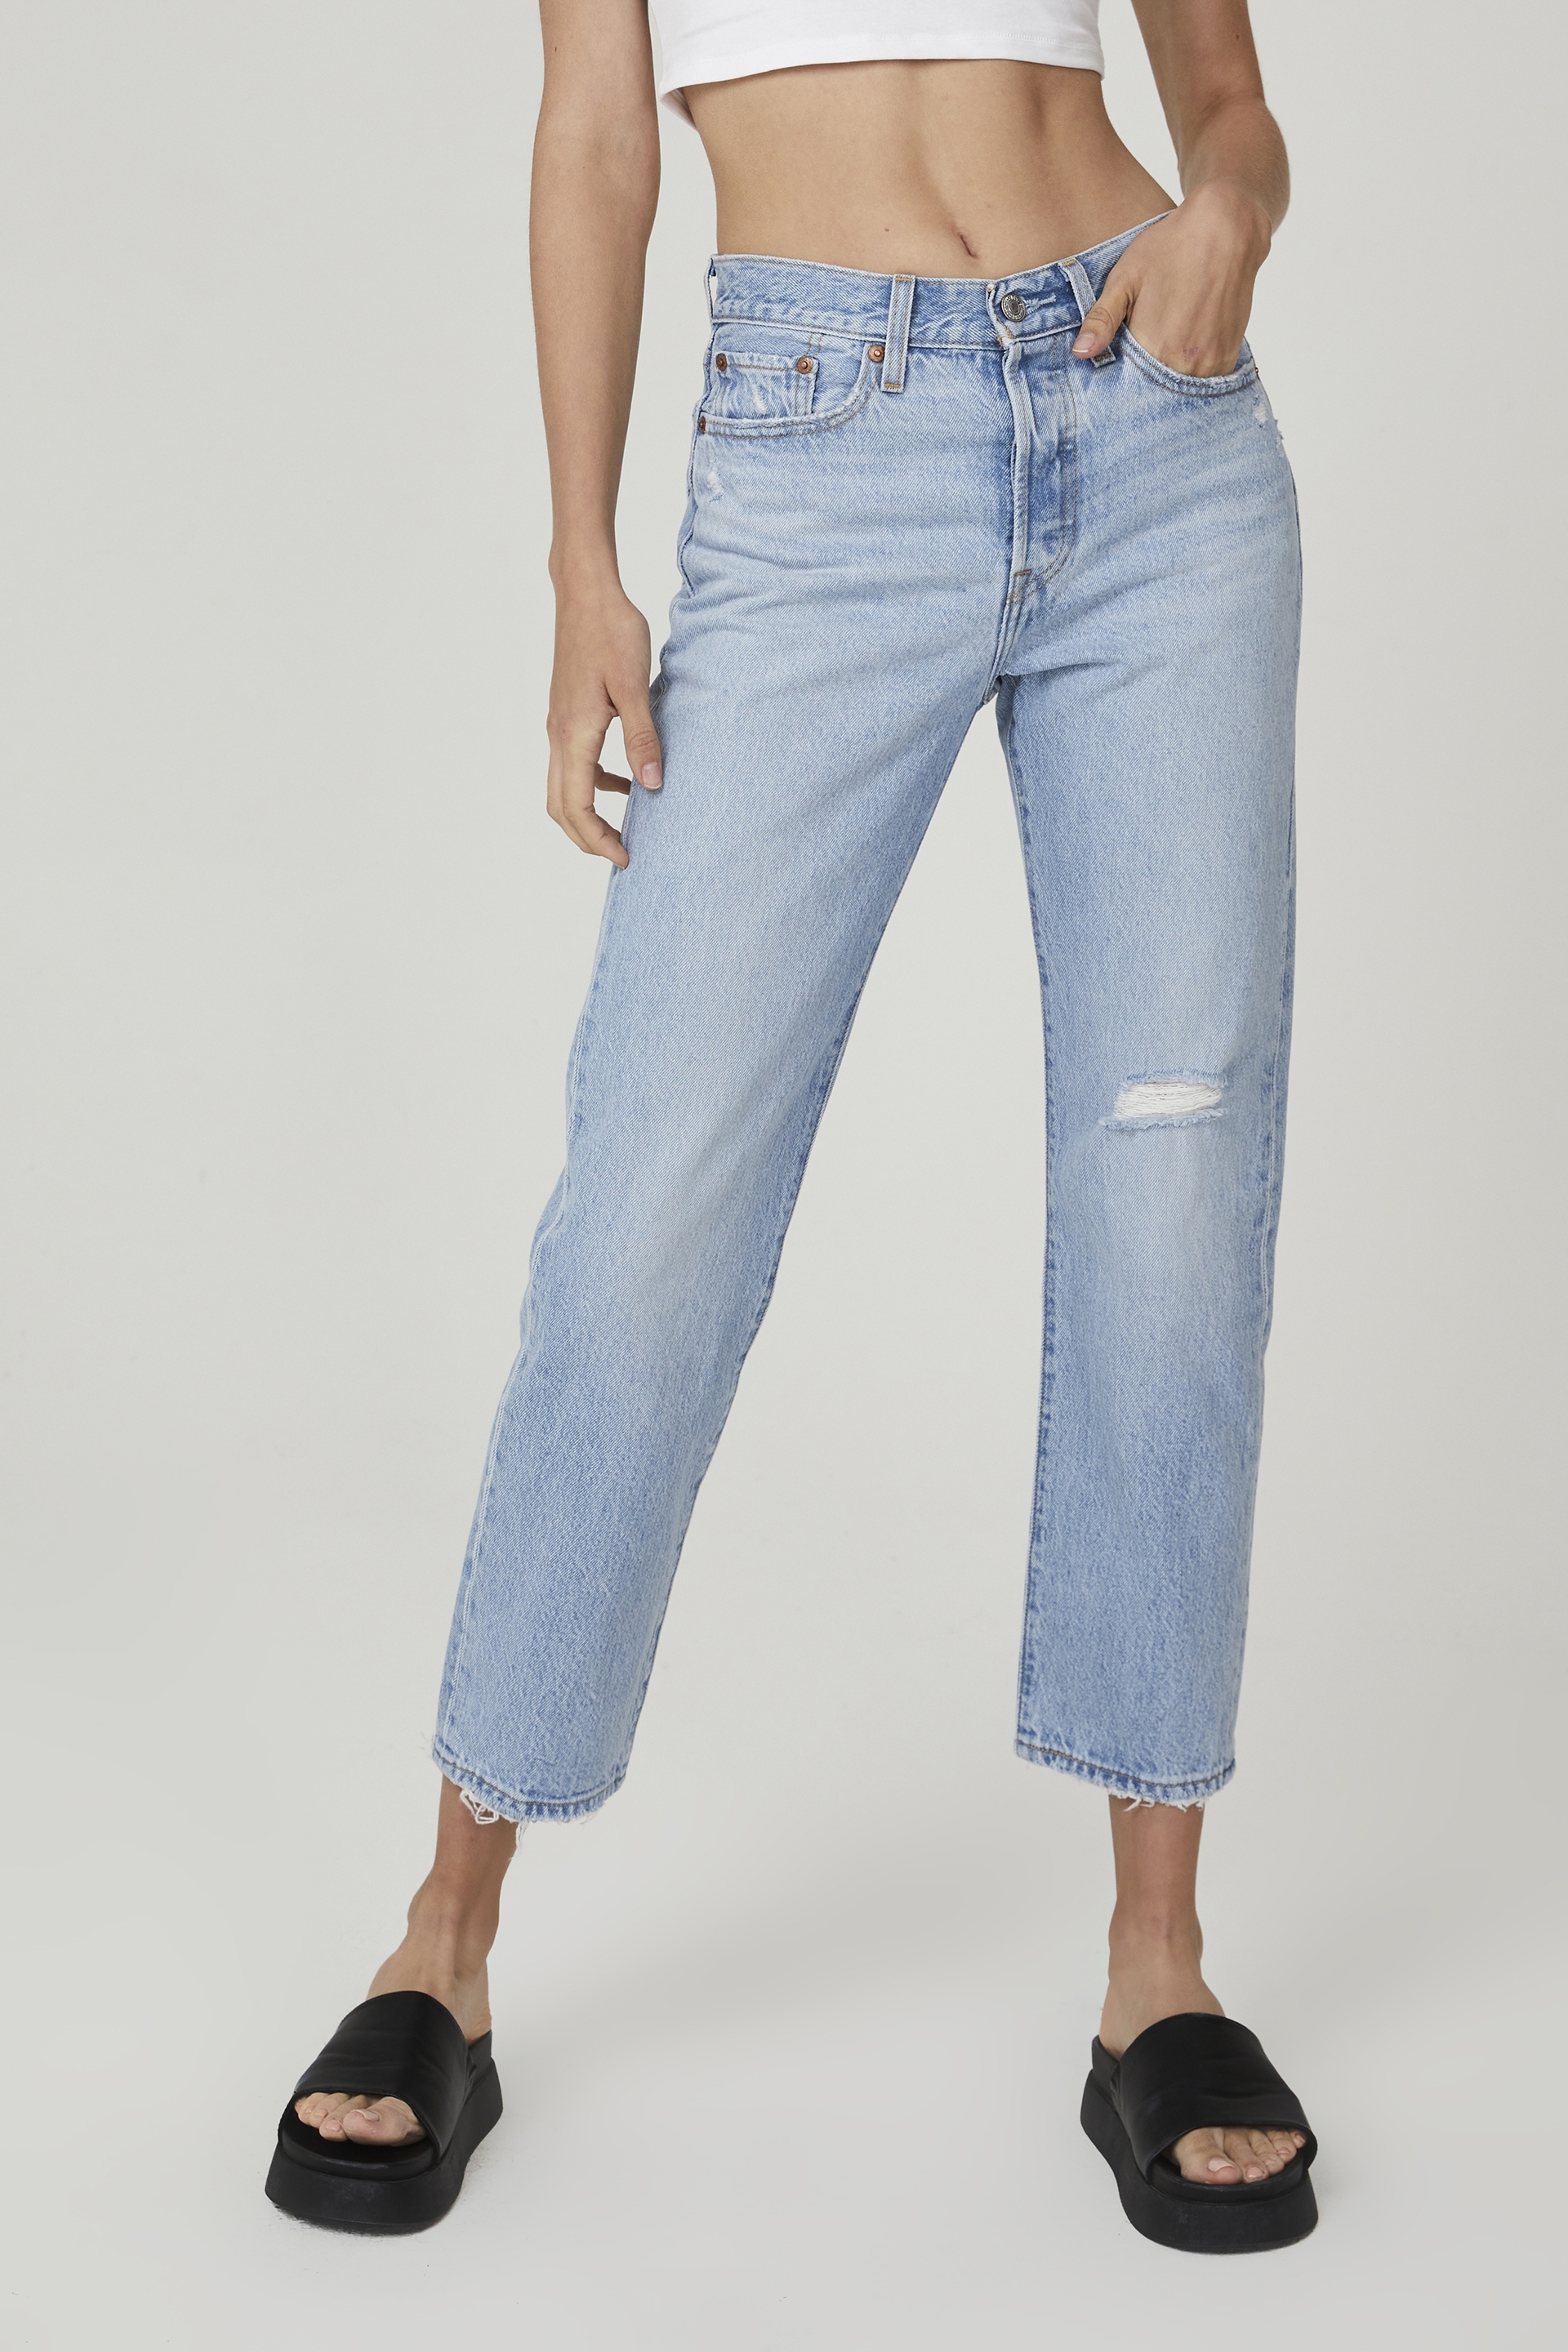 Authentically Yours Wedgie Straight Jean Garmentory 